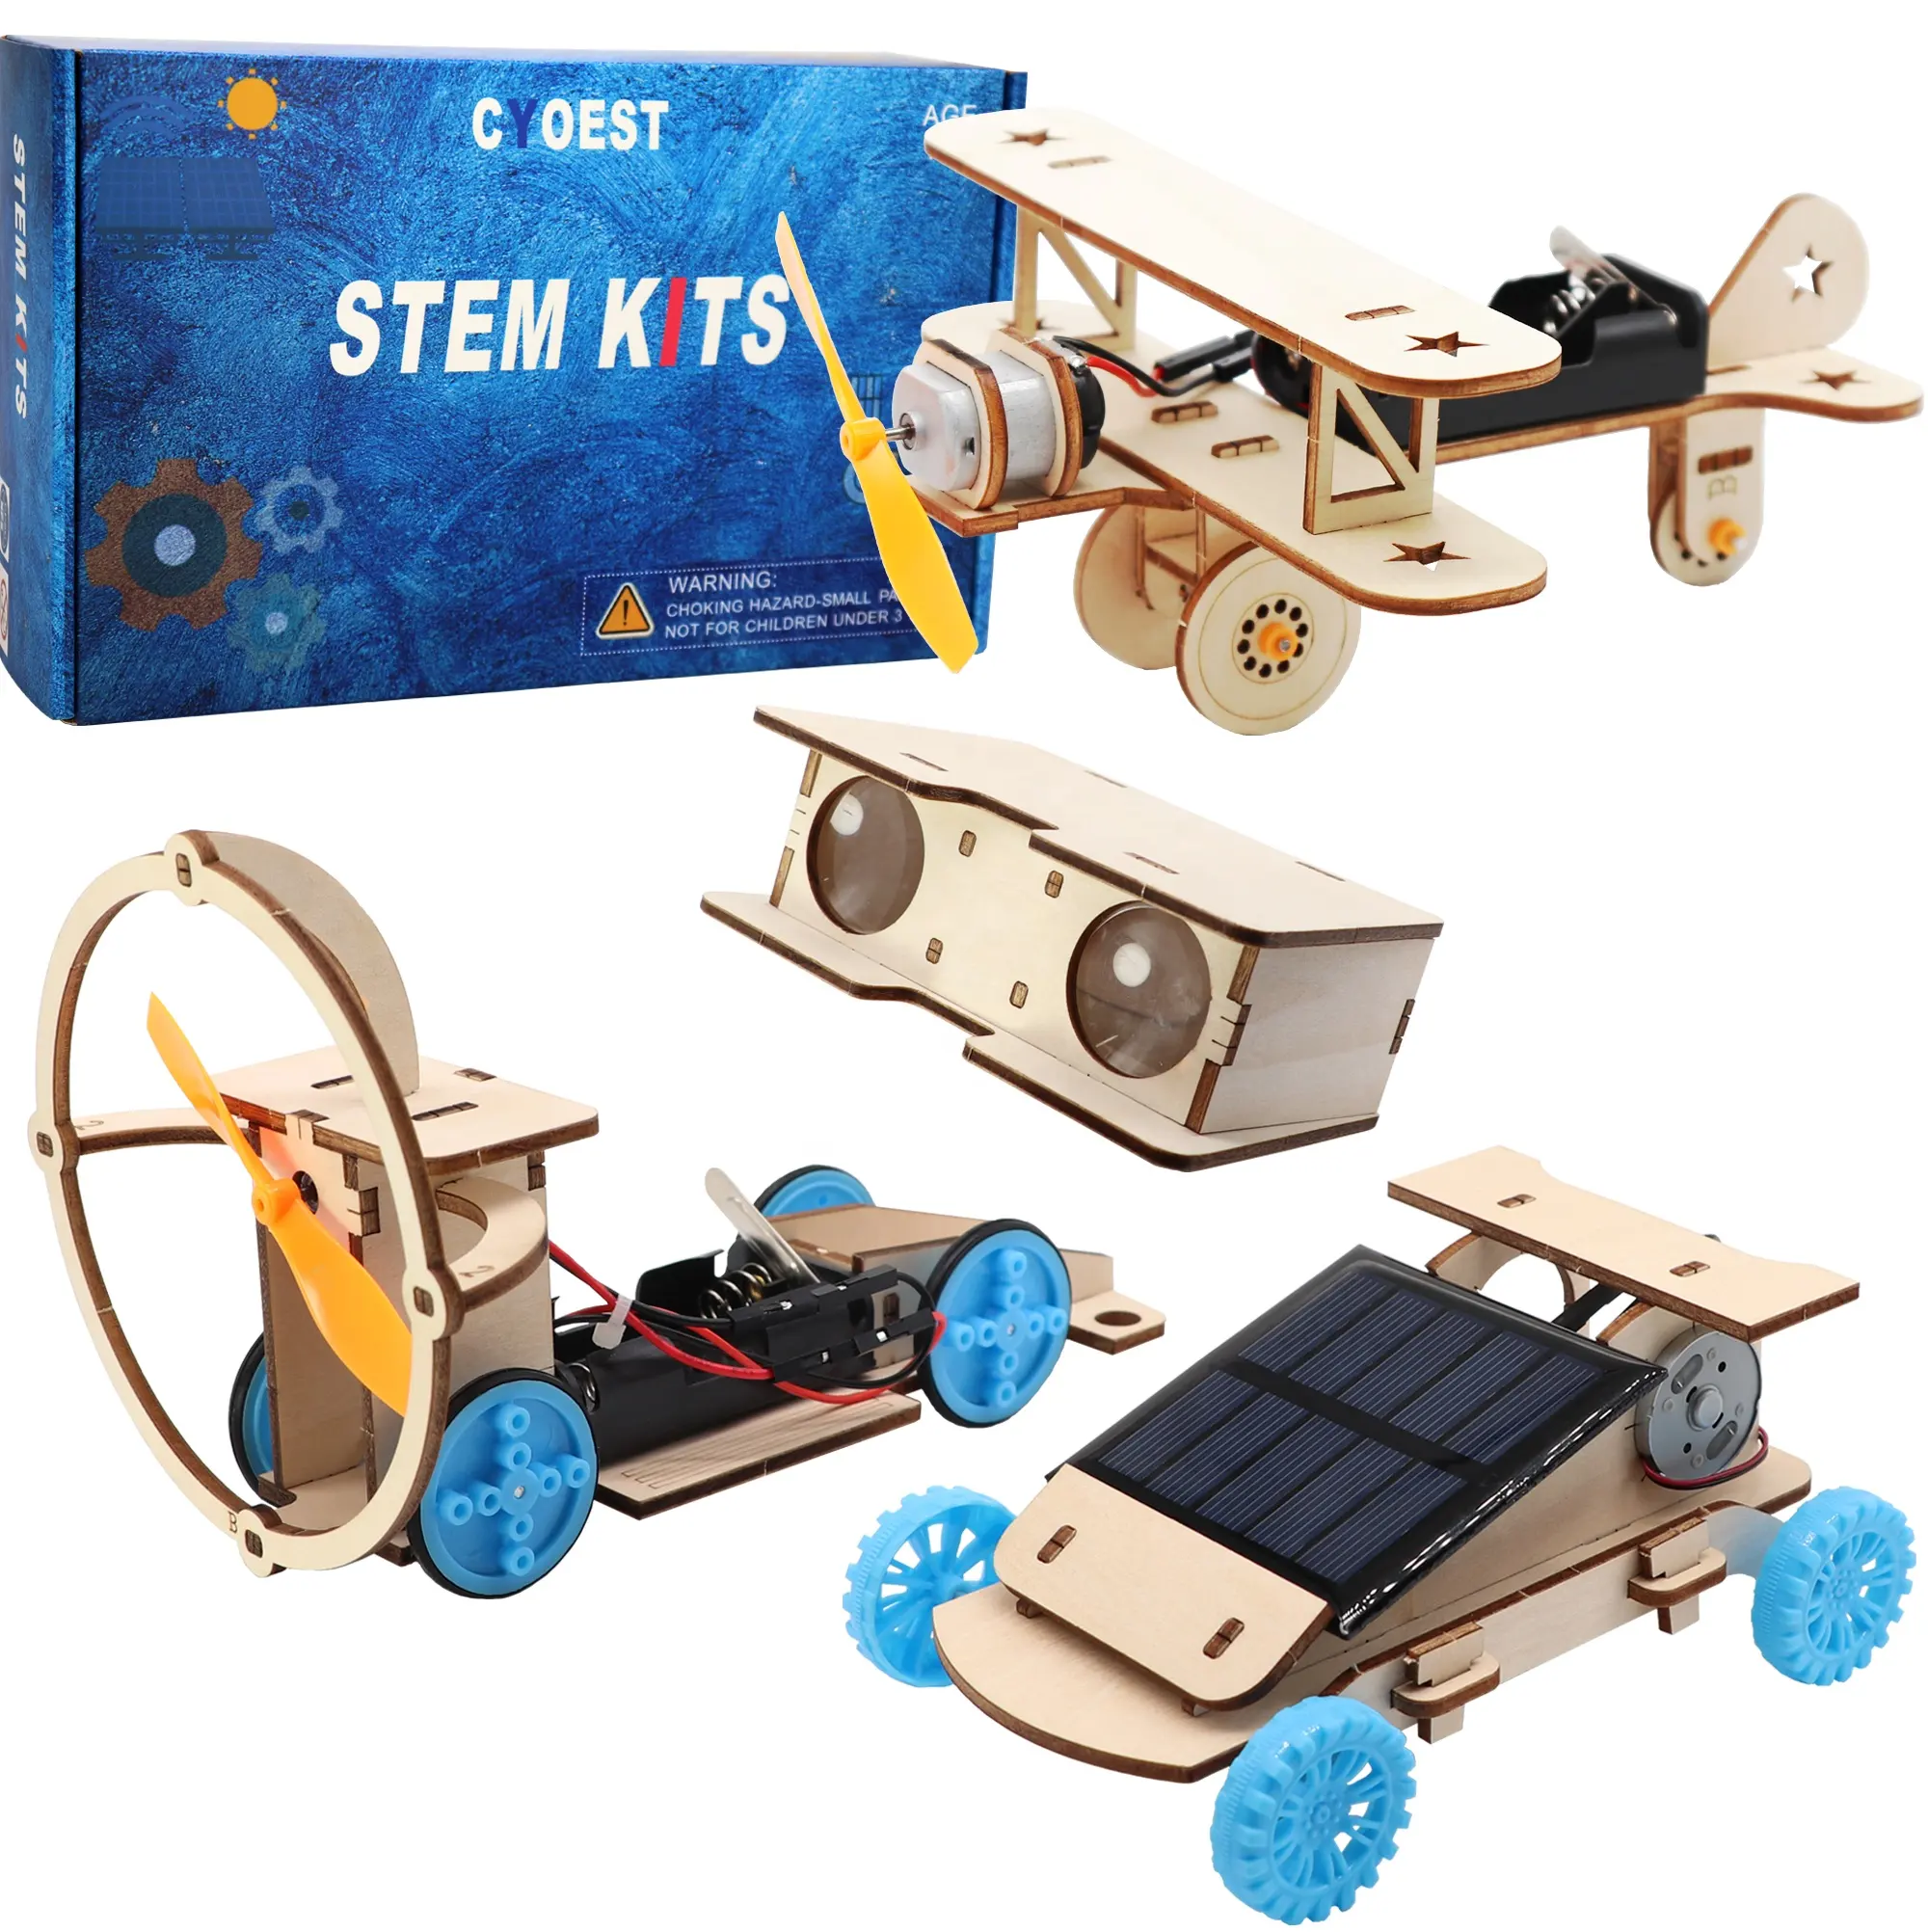 4 sets in 1 Wooden Science Experiment Model Kit Solar Power Car,STEM Educational Building Project kit for kids